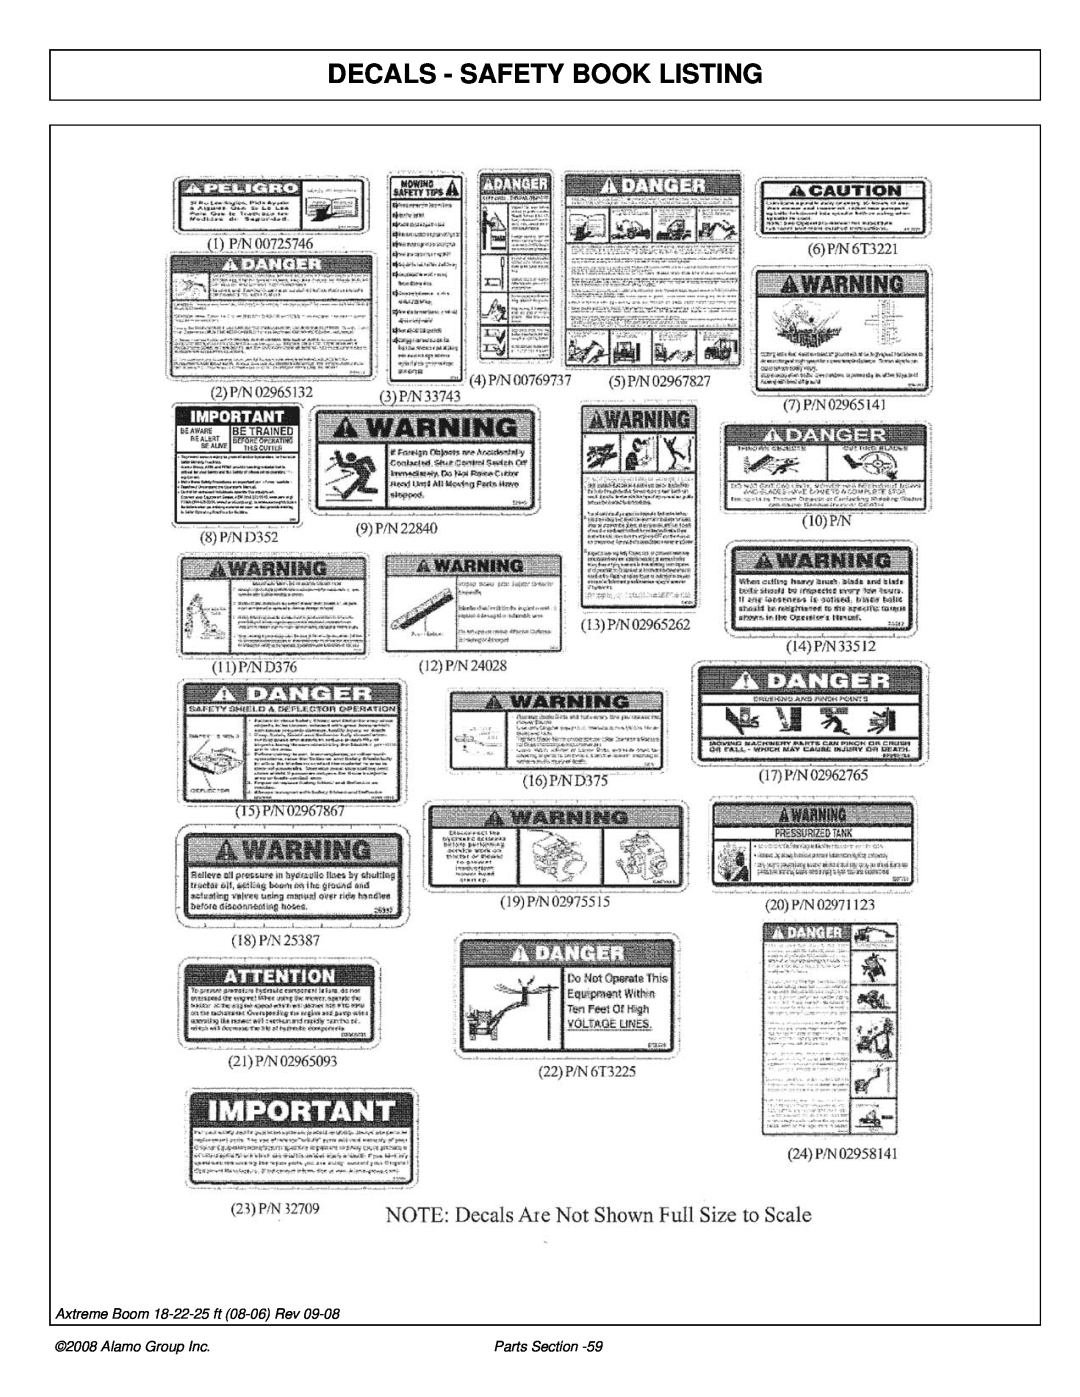 Alamo FC-P-0002 manual Decals - Safety Book Listing, Axtreme Boom 18-22-25 ft 08-06 Rev, Alamo Group Inc, Parts Section 